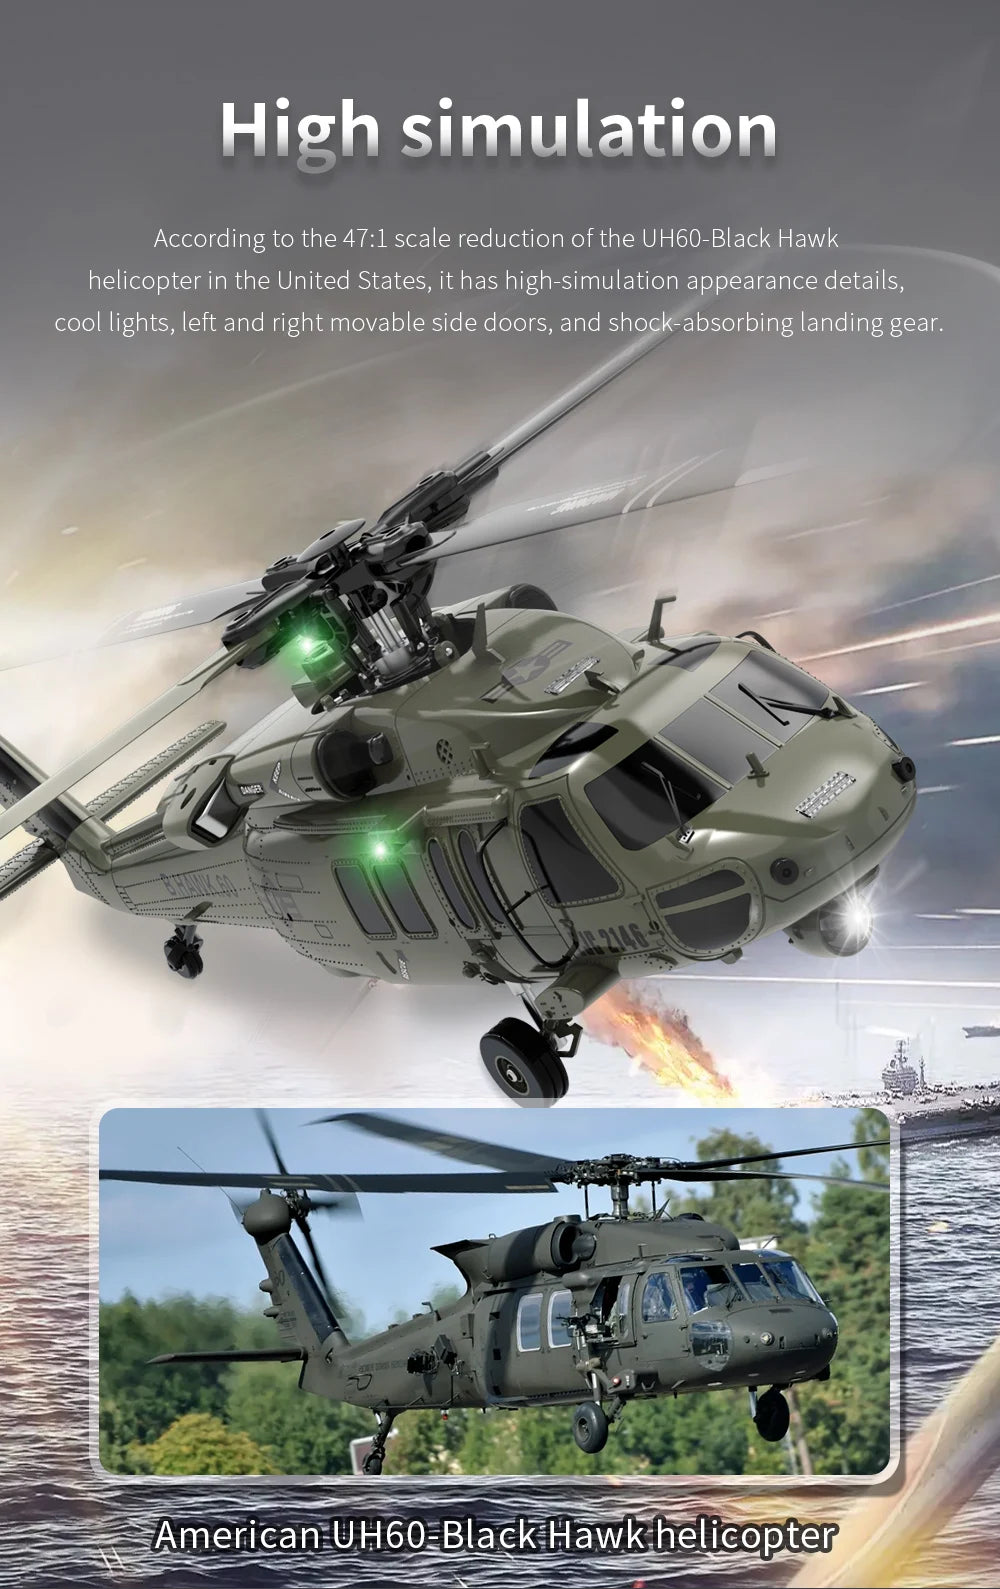 YXZNRC F09 RC Helicopter, high-simulation appearance details, cool lights, left and right movable side doors